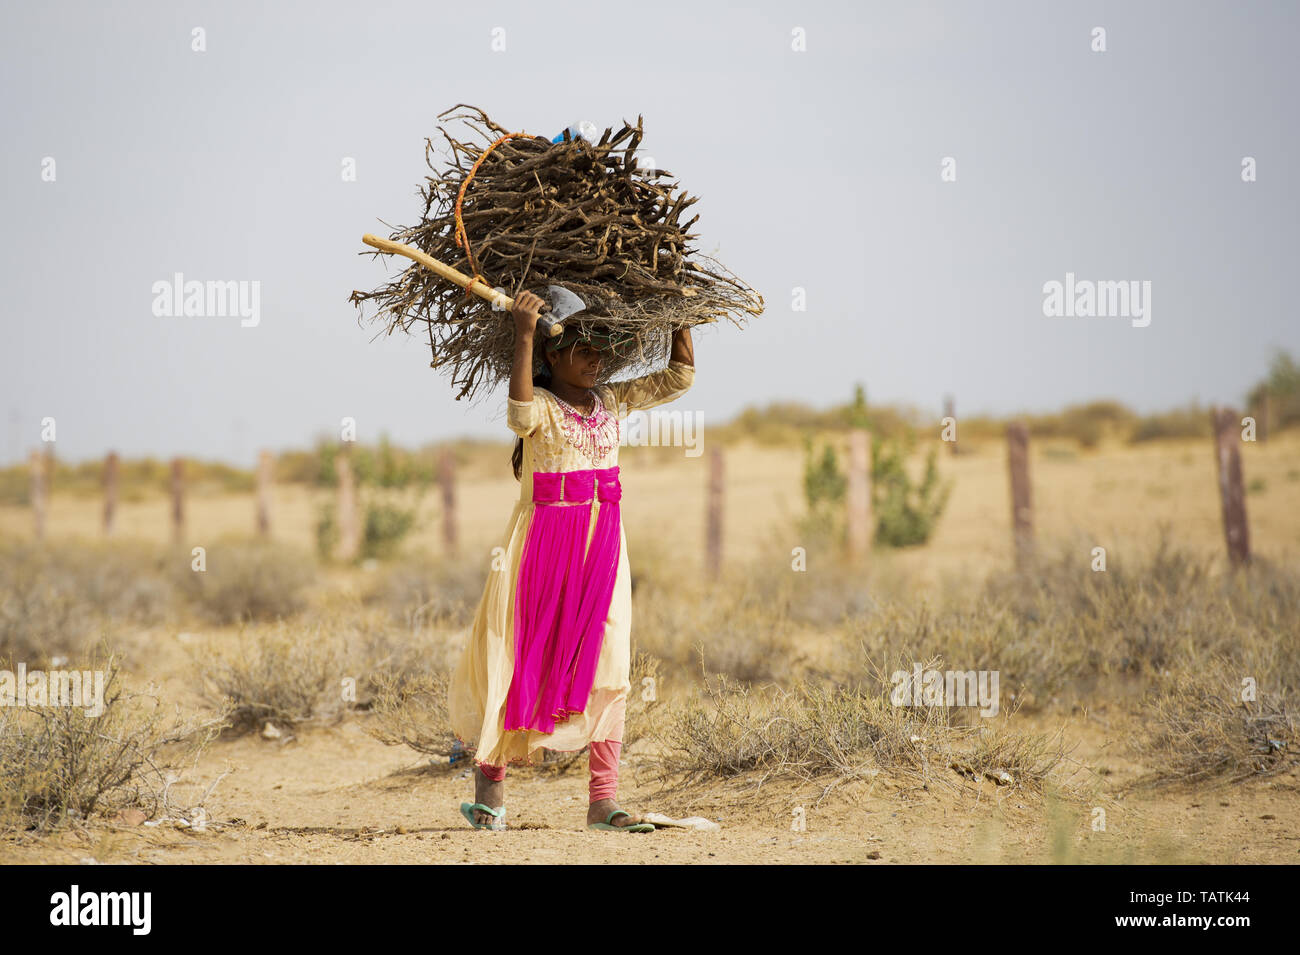 A poor and young girl is carrying heavy bunches of dry wood on her head in the middle of the Thar Desert. Stock Photo